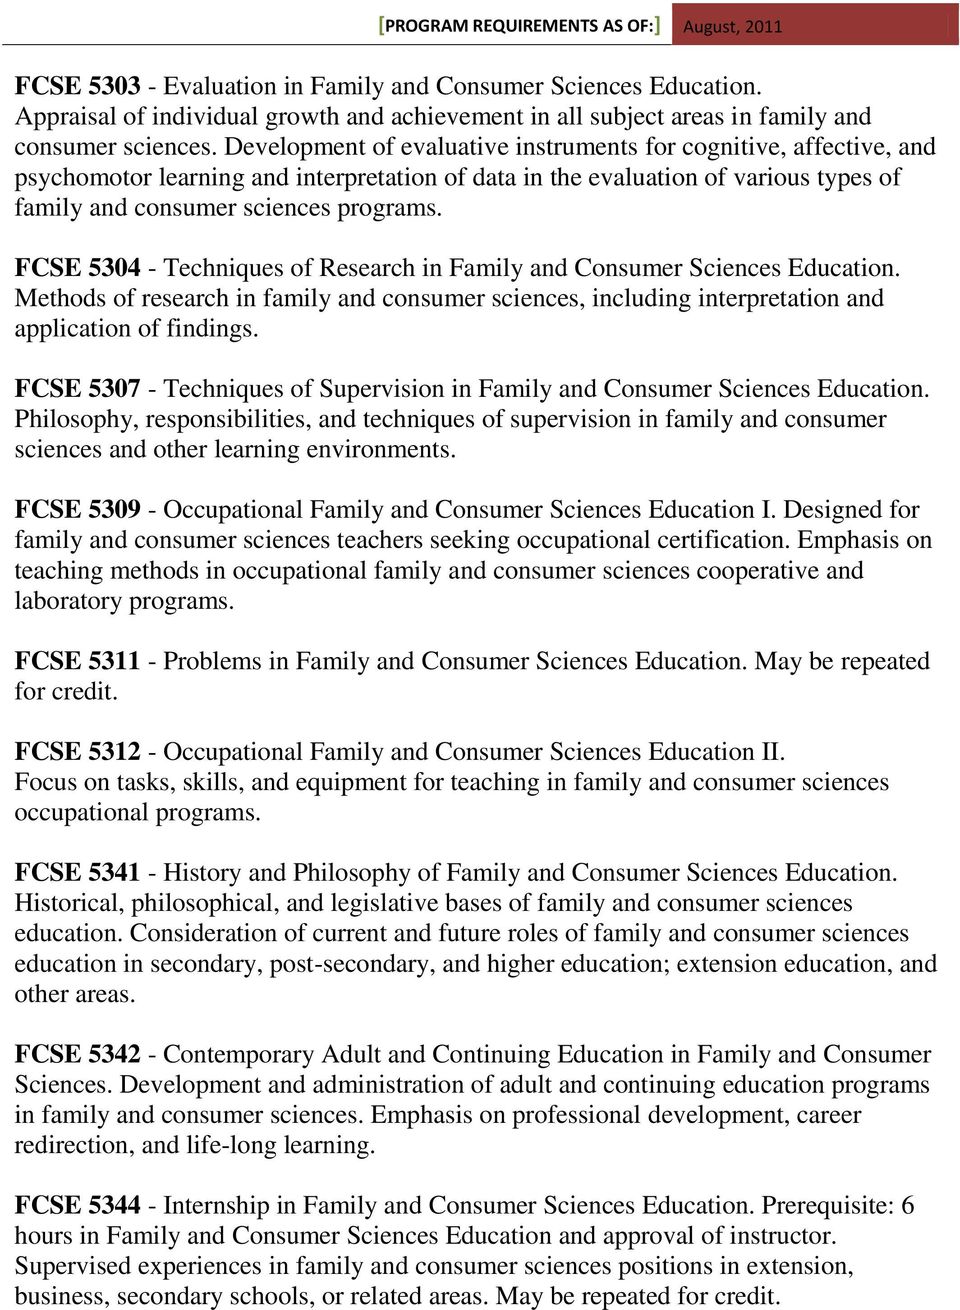 FCSE 5304 - Techniques of Research in Family and Consumer Sciences Education. Methods of research in family and consumer sciences, including interpretation and application of findings.